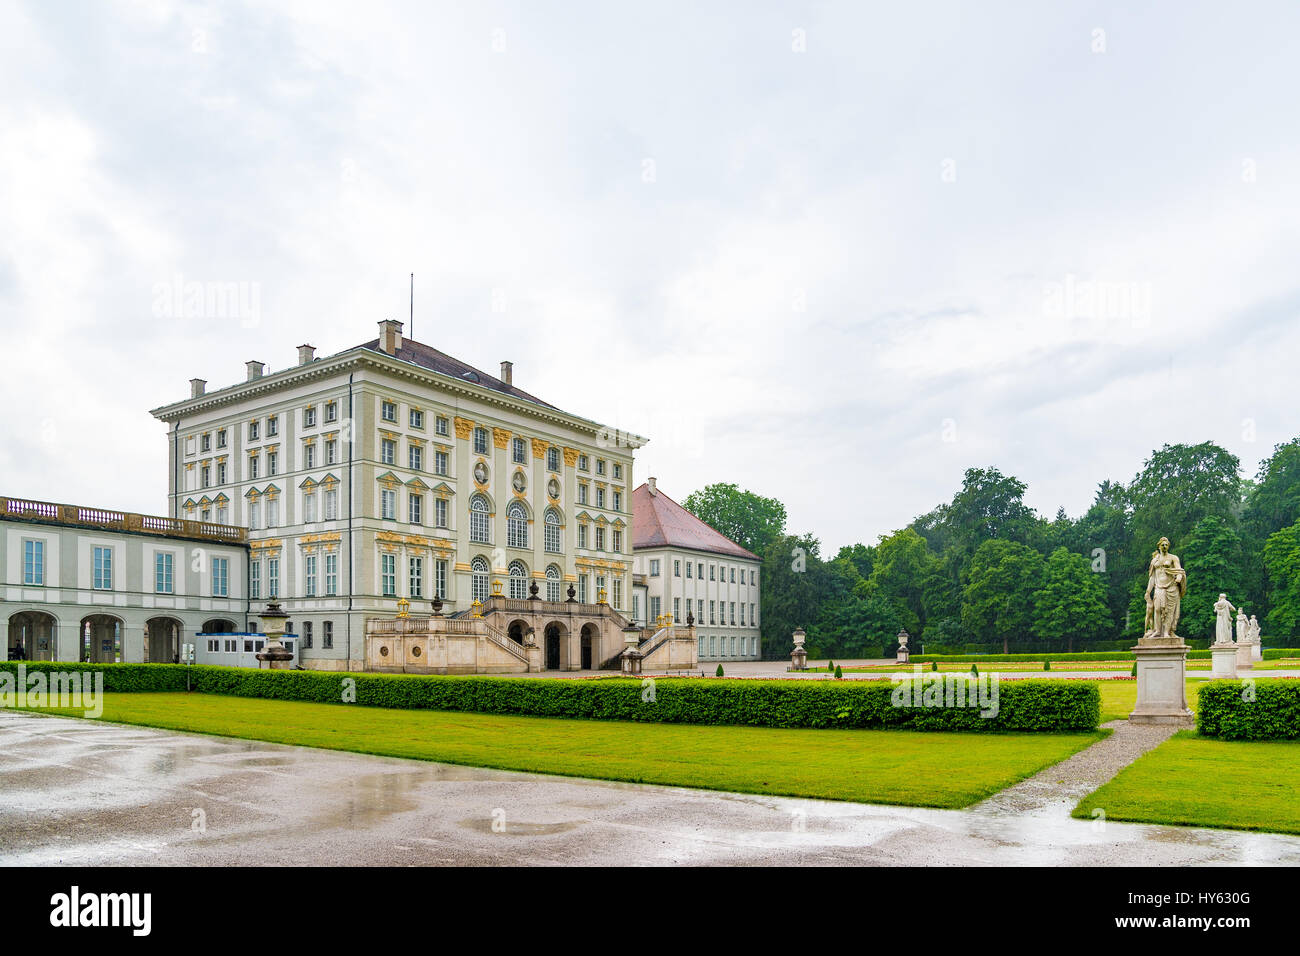 Munich, Germany - June 8. 2016: Nymphenburg Palace, the summer residence of the Bavarian kings, seen from public park Stock Photo